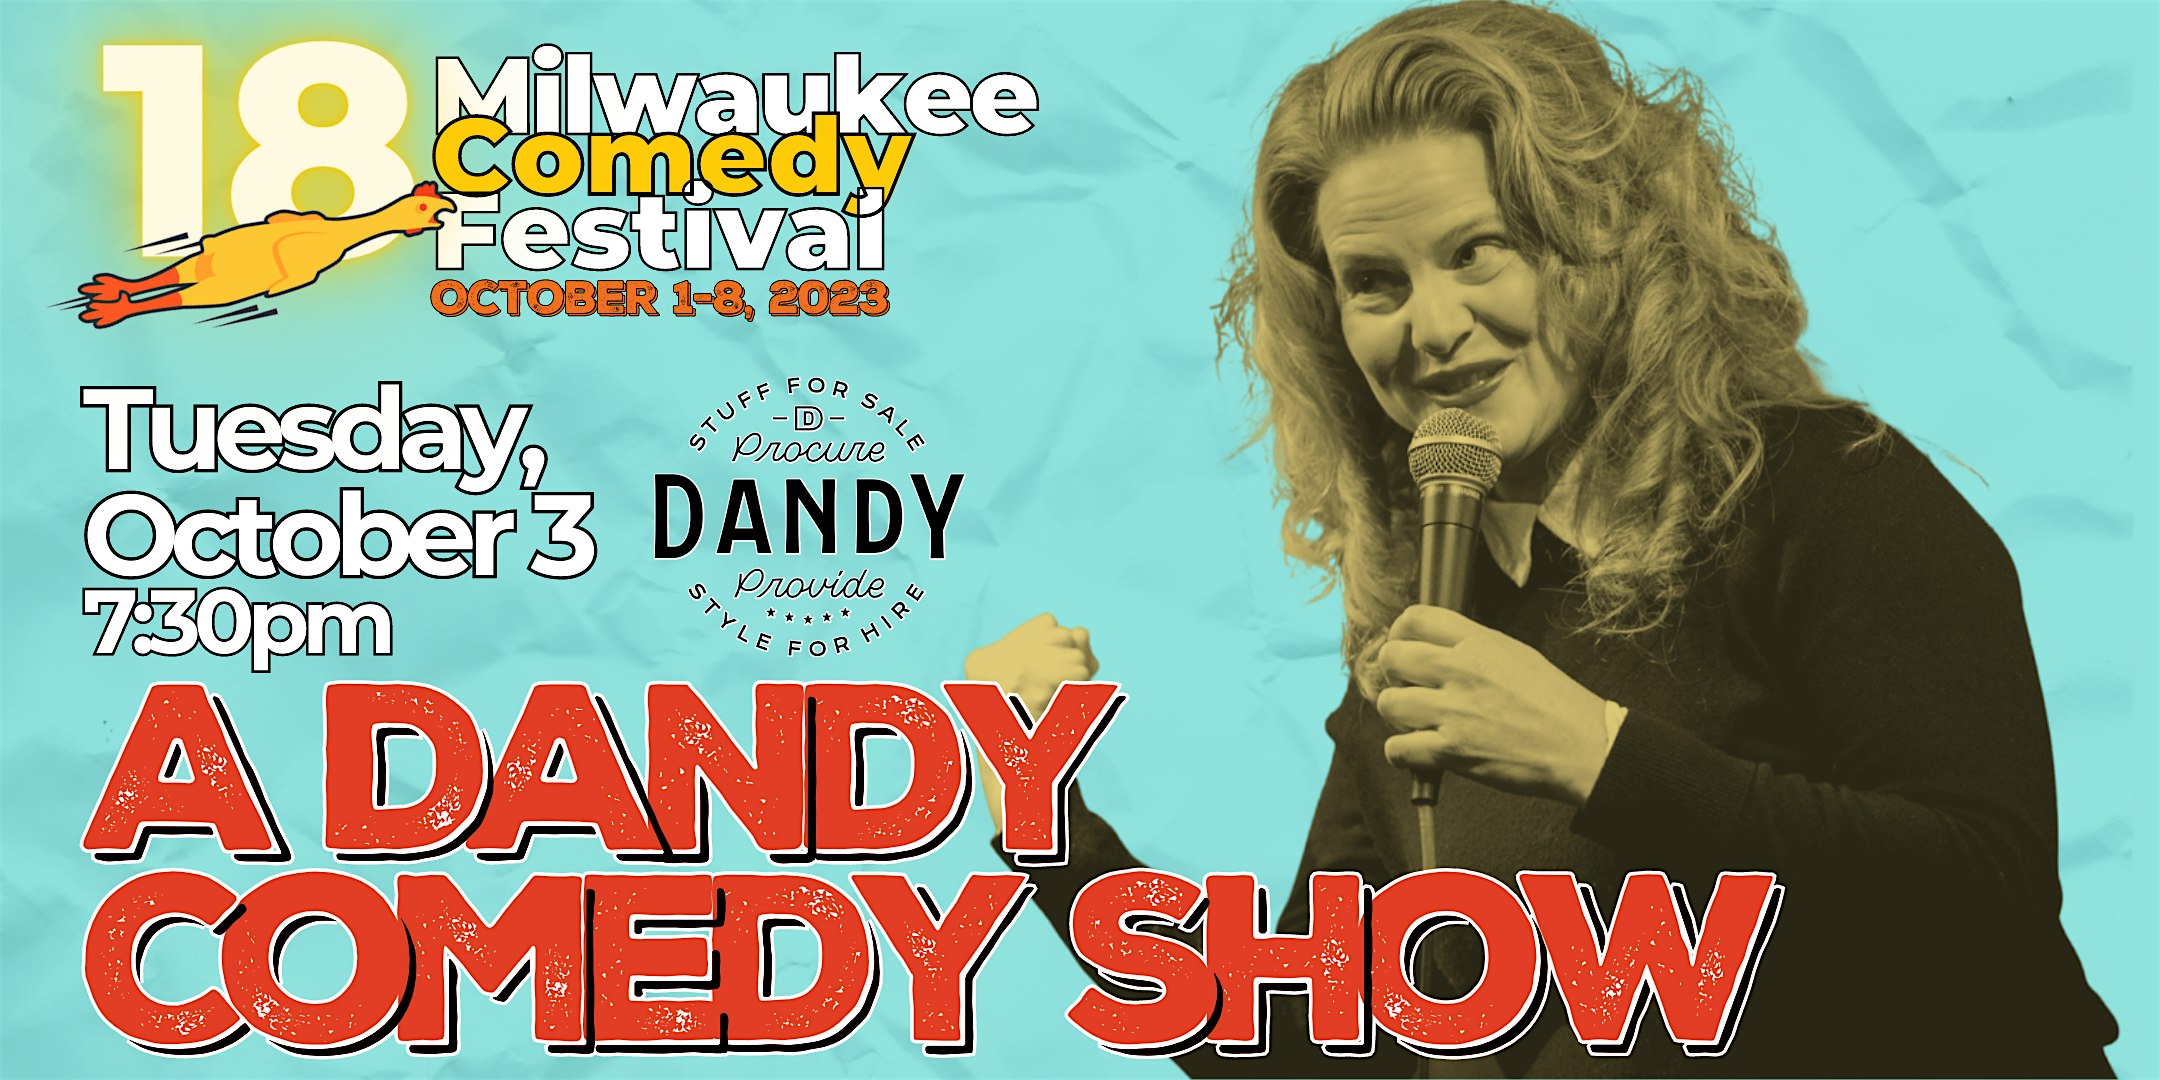 MKE Comedy Fest presents: A Dandy Comedy Show